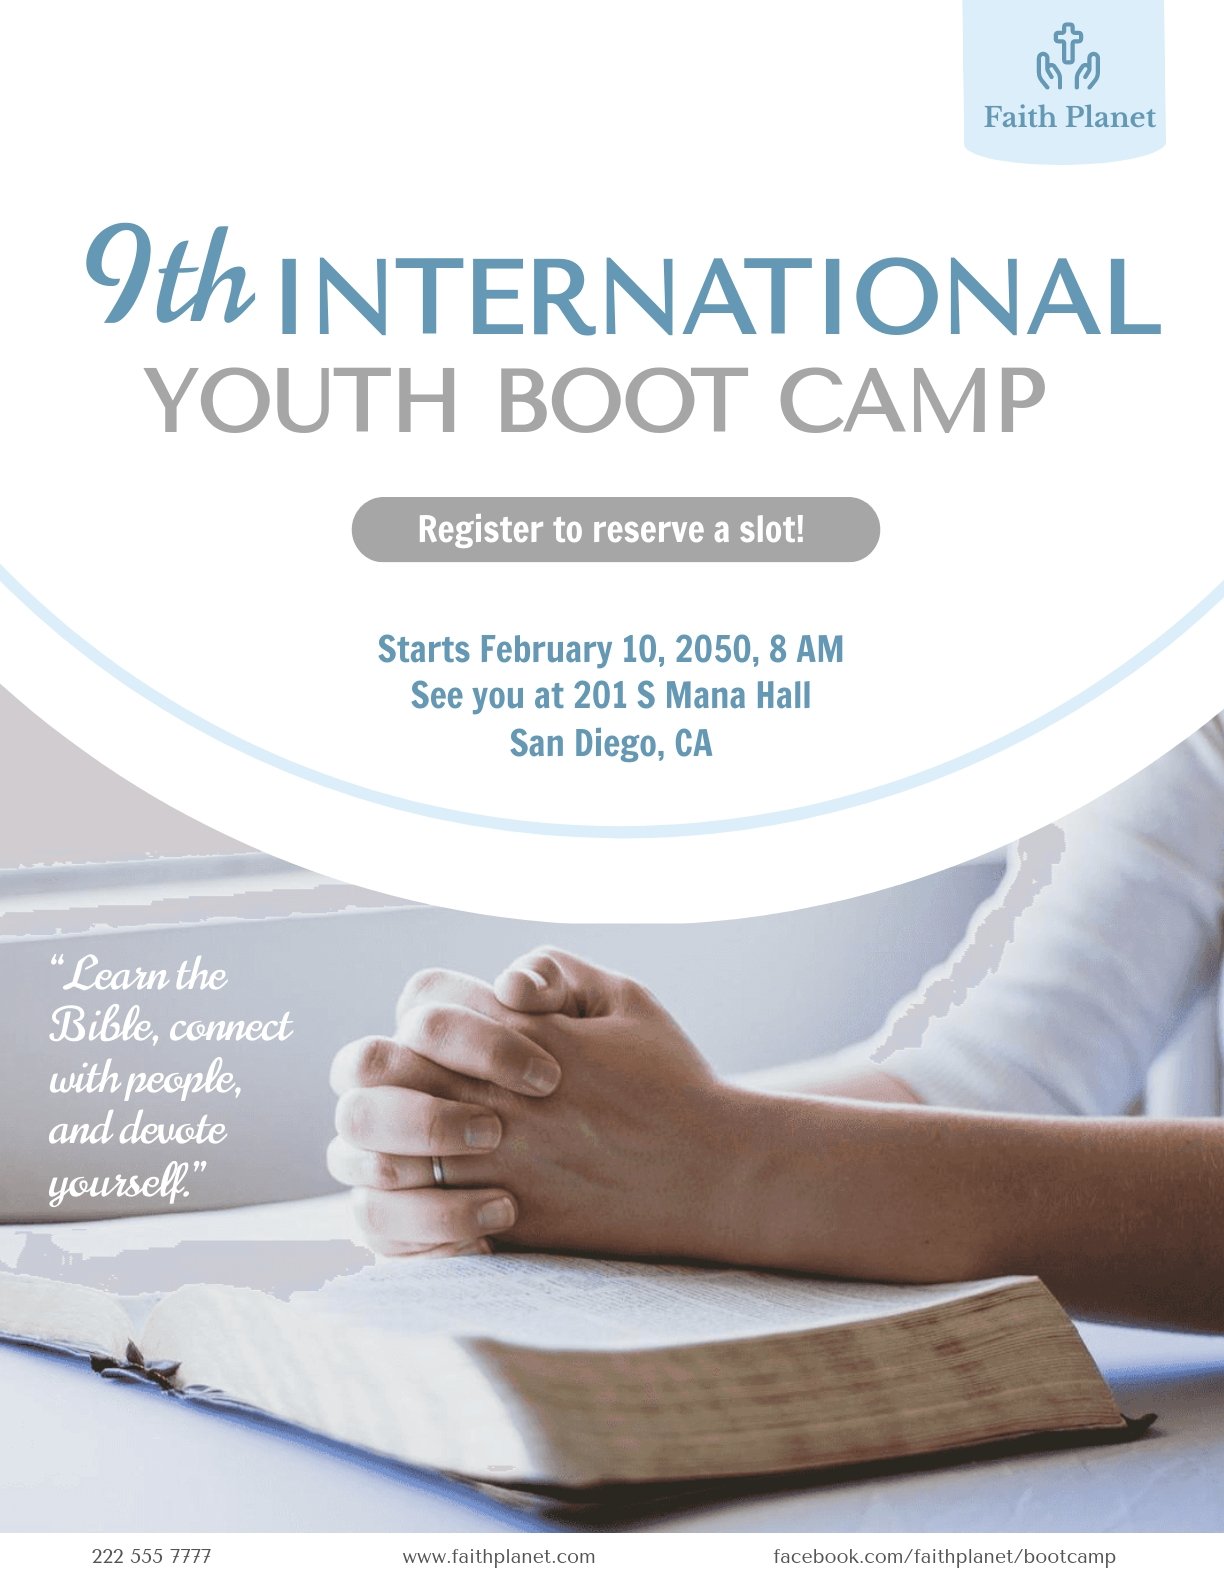 Free Spiritual Bootcamp Flyer in Word, Google Docs, Illustrator, PSD, Apple Pages, Publisher